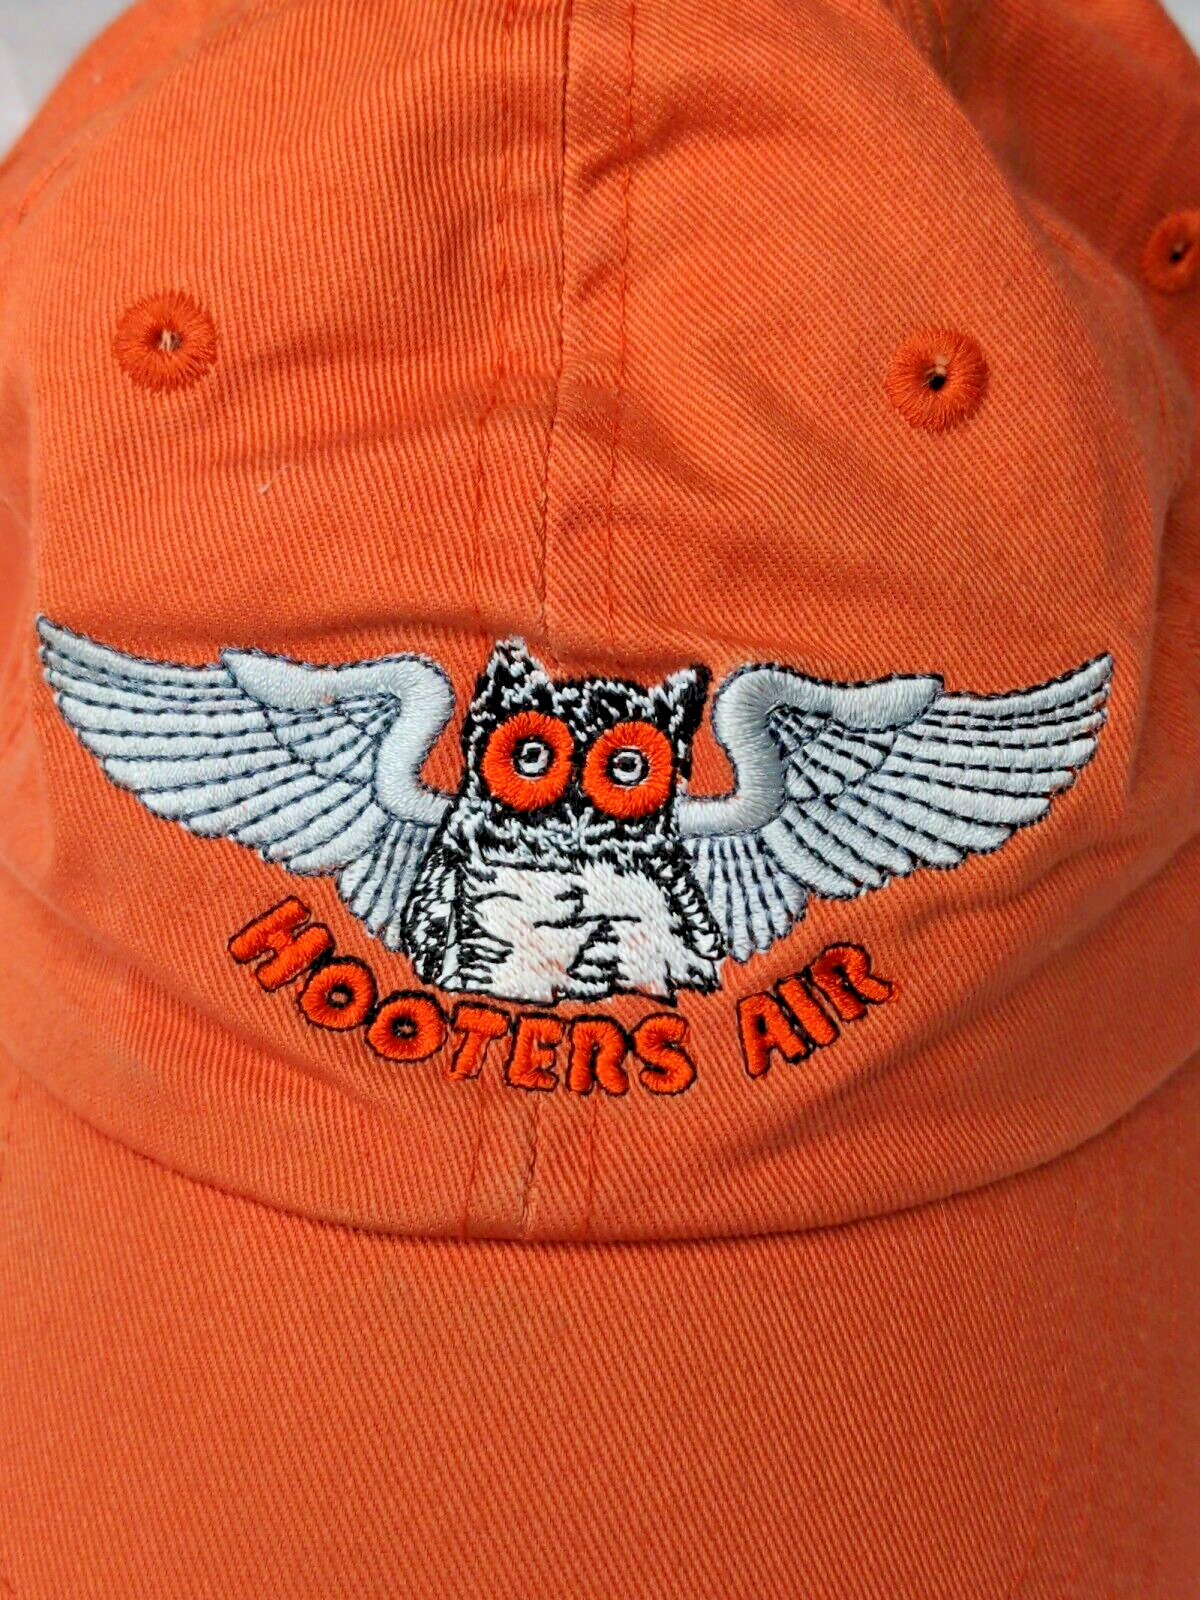 Vintage Hooters Air Airline Airplane Official Product Orange Embroidered Cap Hat